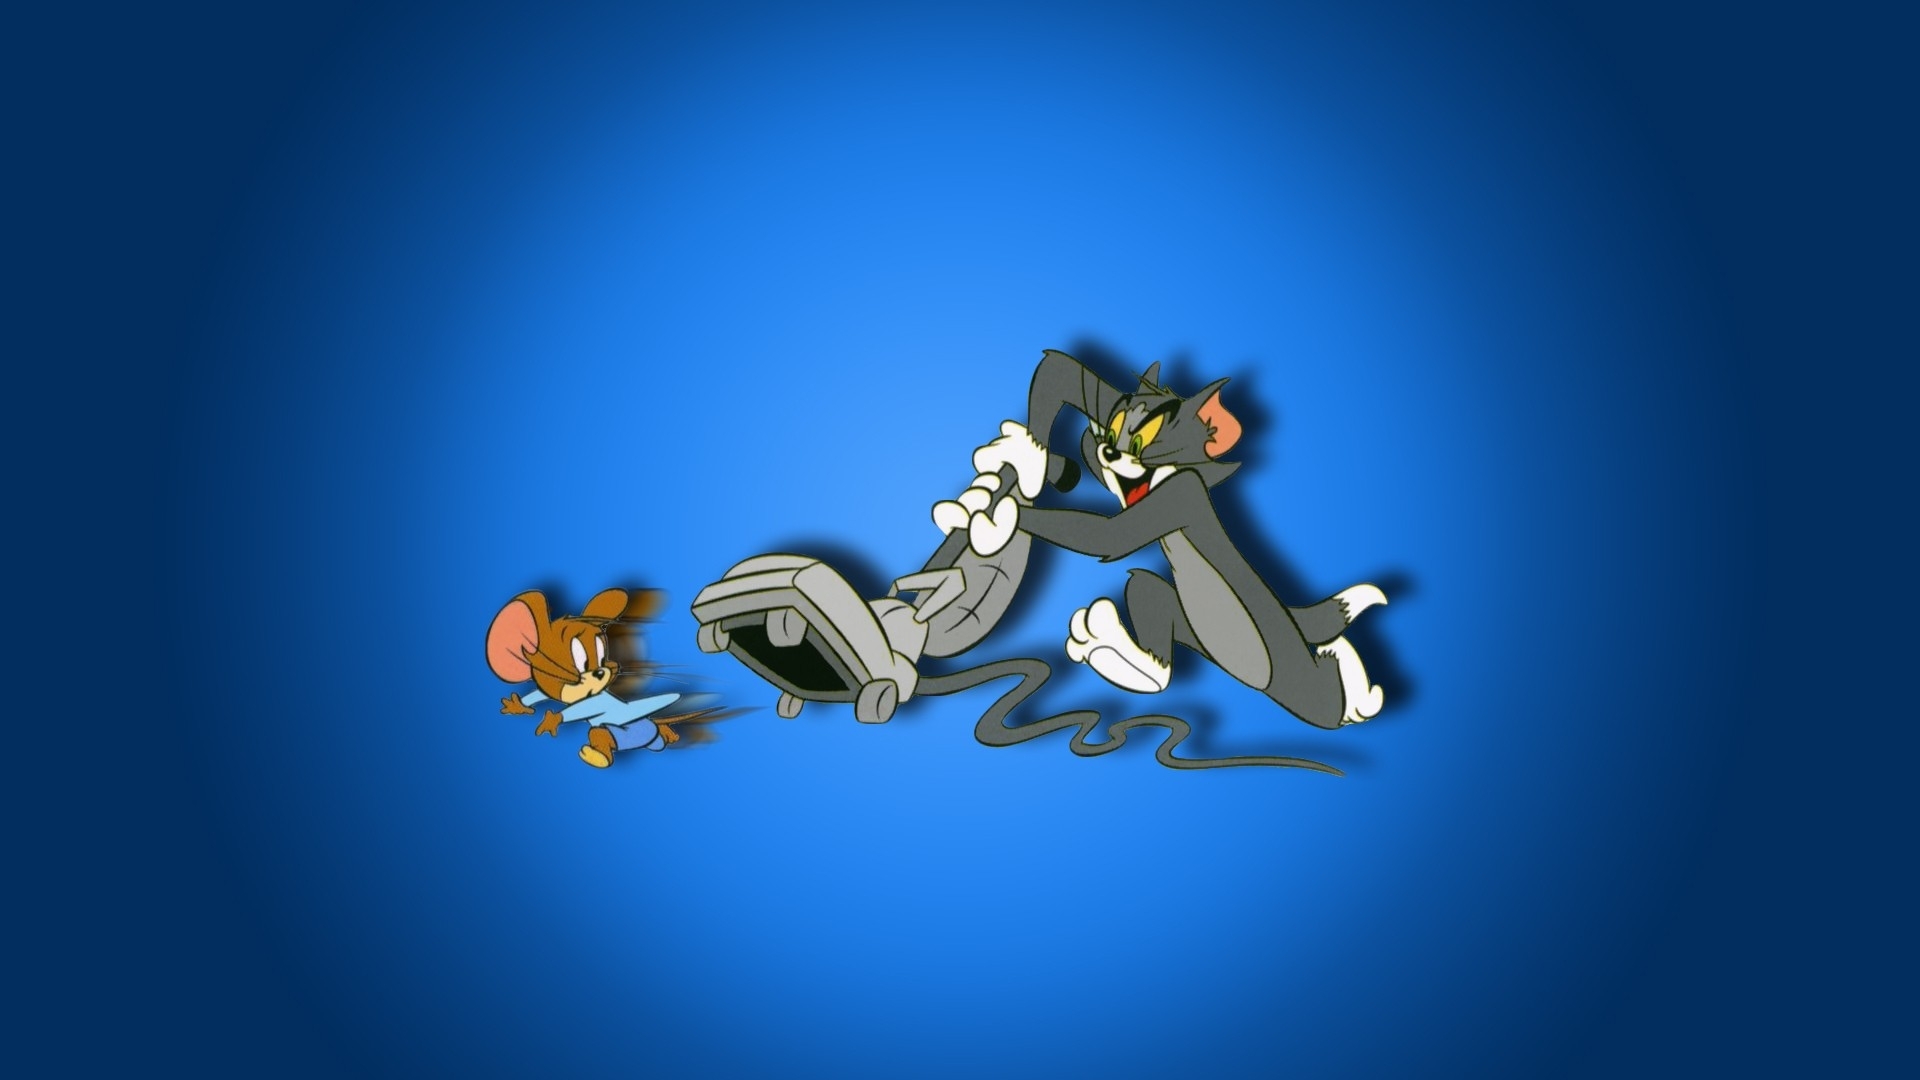 tom, Jerry, Cartoons, Cats, Mice, Mouse, Blue, Humor, Funny, Action Wallpaper